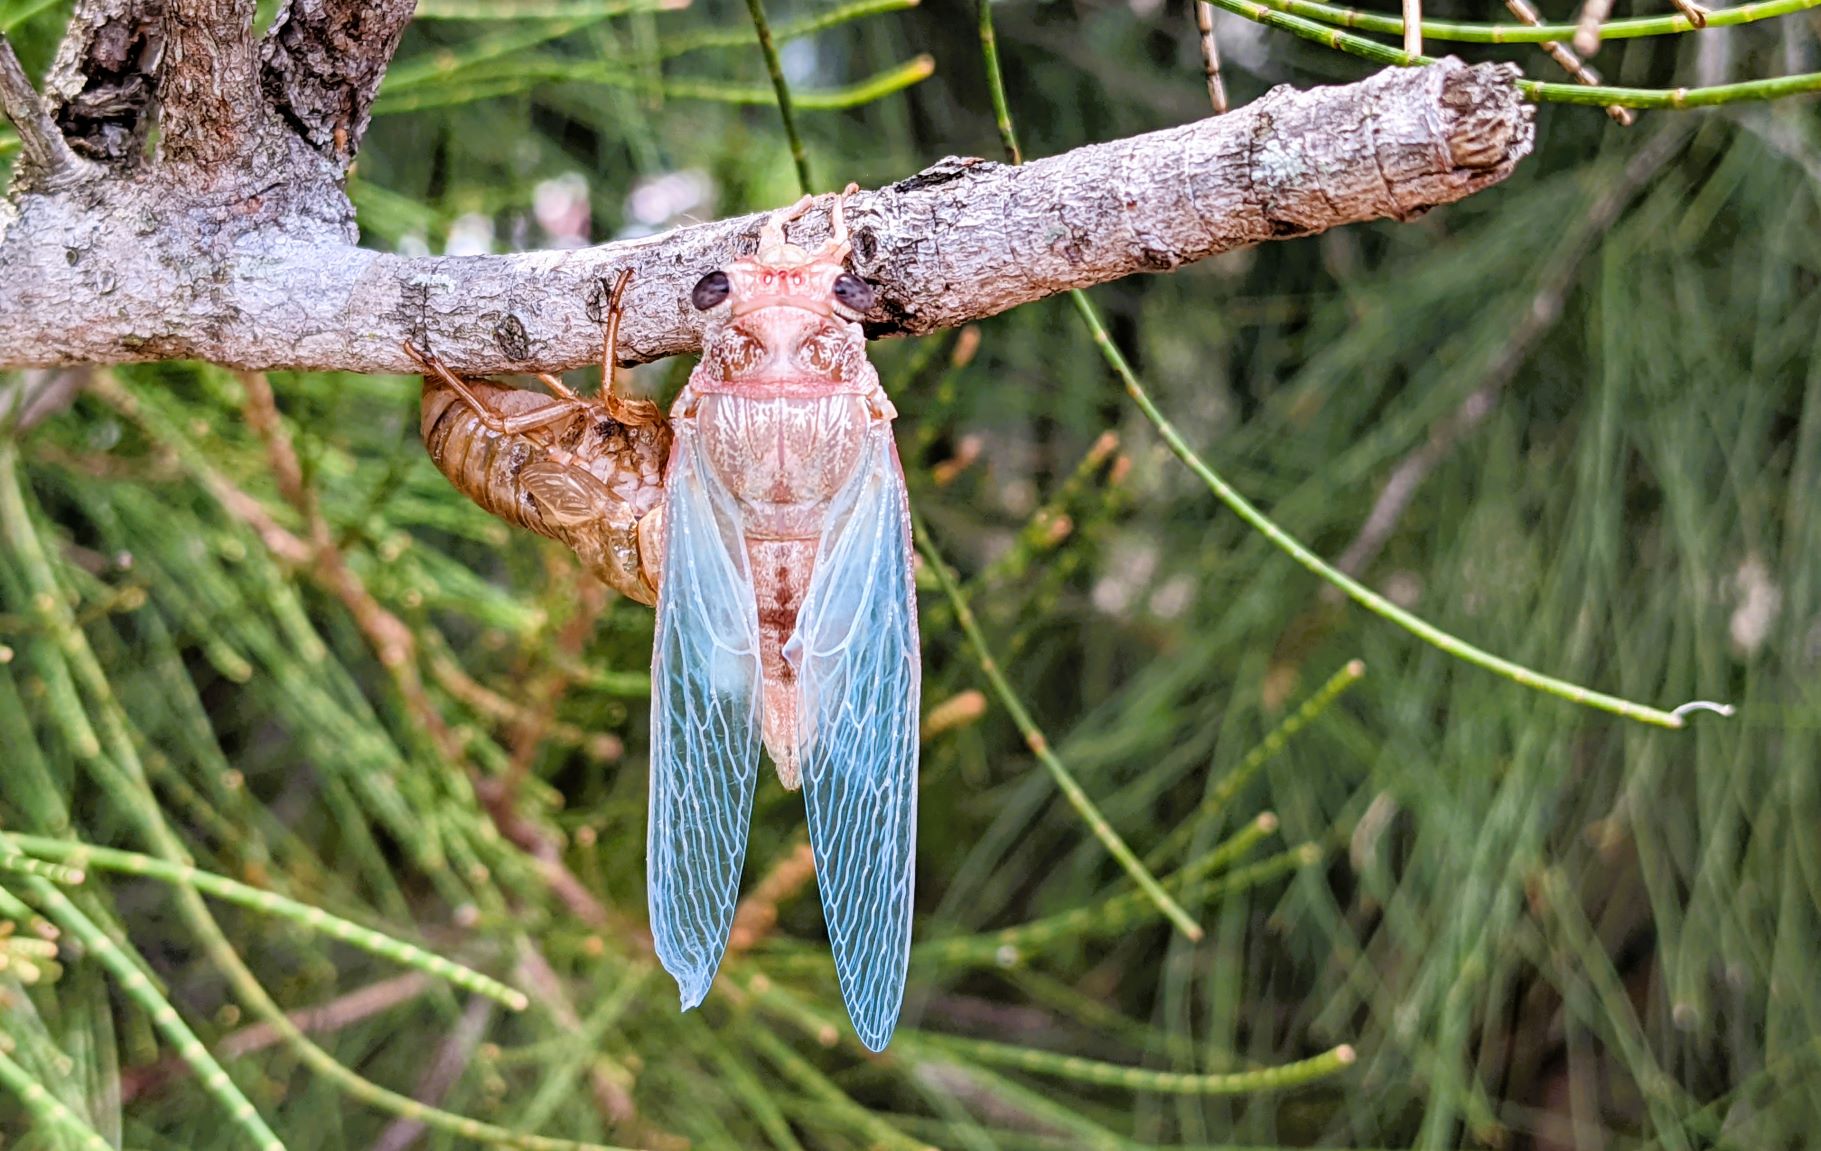 Cicada drying their wings